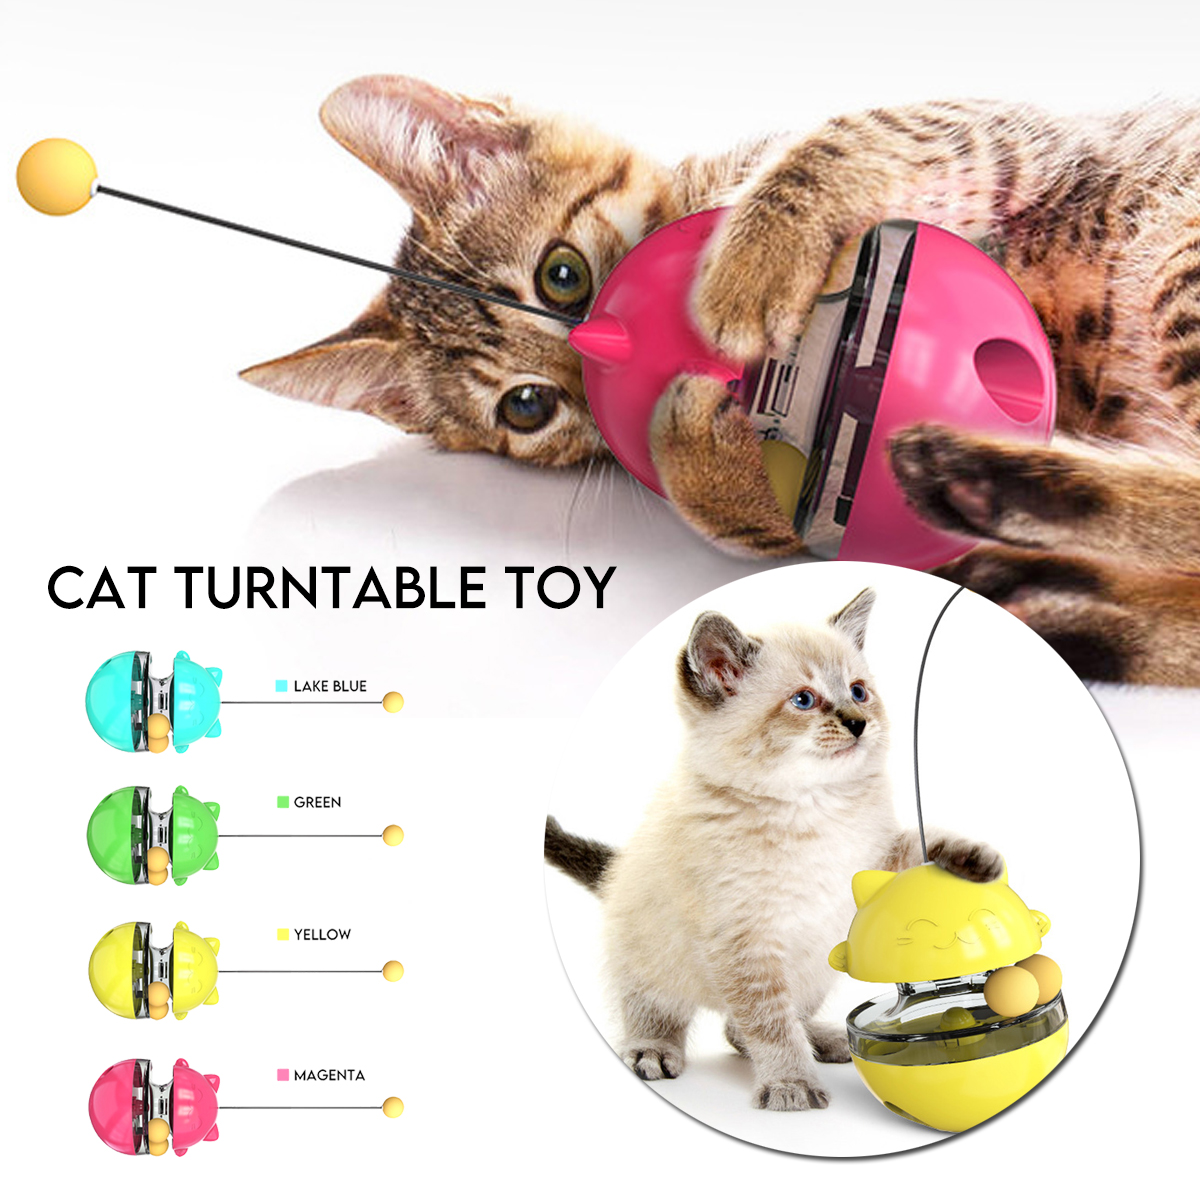 Pet-Interactive-Tumbler-Toy-Leaking-Food-Ball-Toy-Cat-Stick-Turntable-Toy-Funny-Pet-Training-Tool-1750005-1